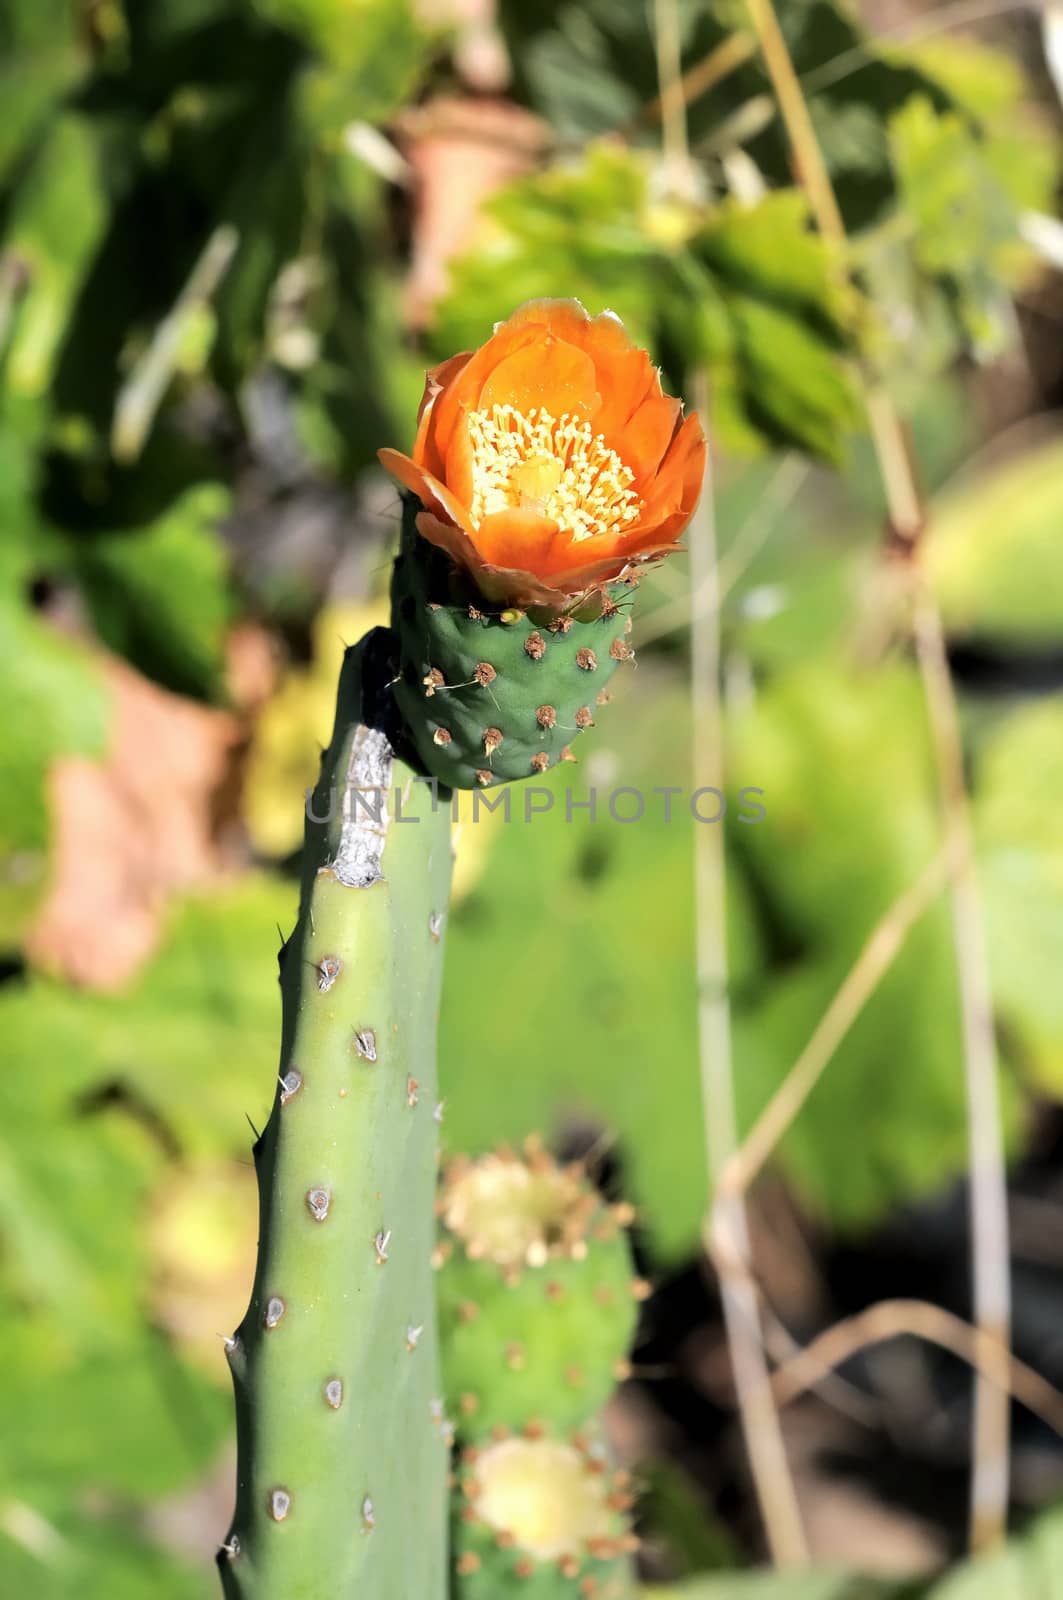 Orange Flower on top of a Green Cactus in the Desert